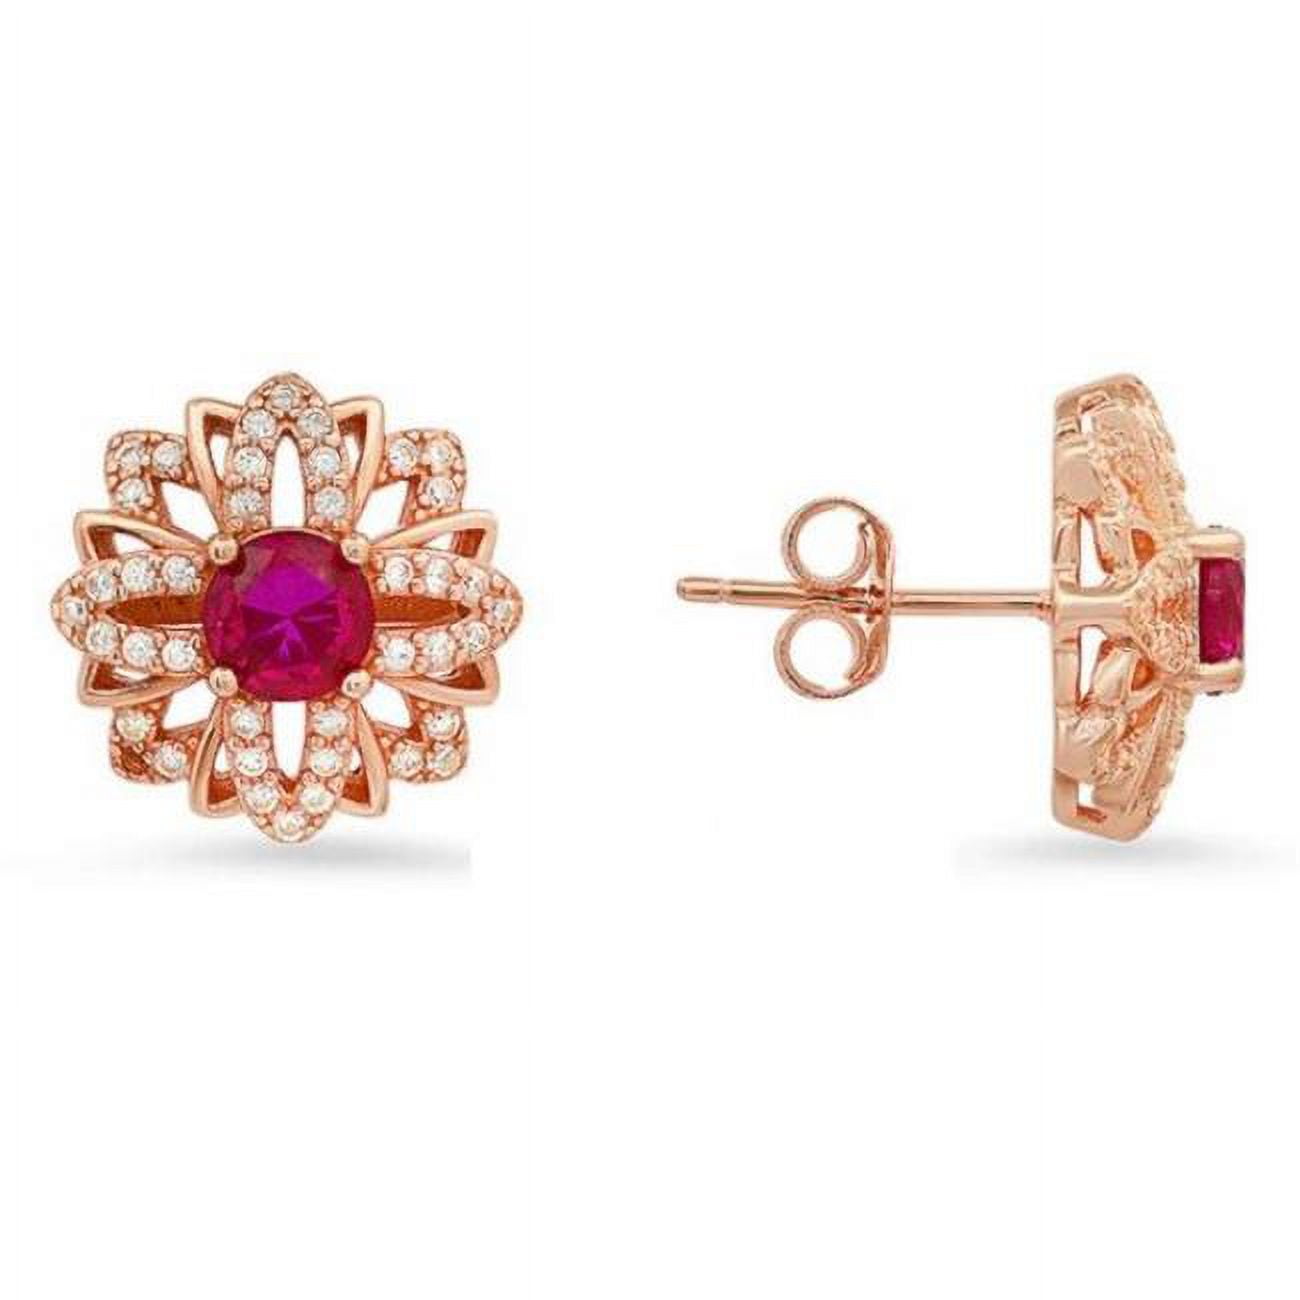 Picture of 212 Main 04-057RBR-DSE Womens 14K Rose Gold Over Silver Ruby Cubic Zirconia Floral Stud Earrings